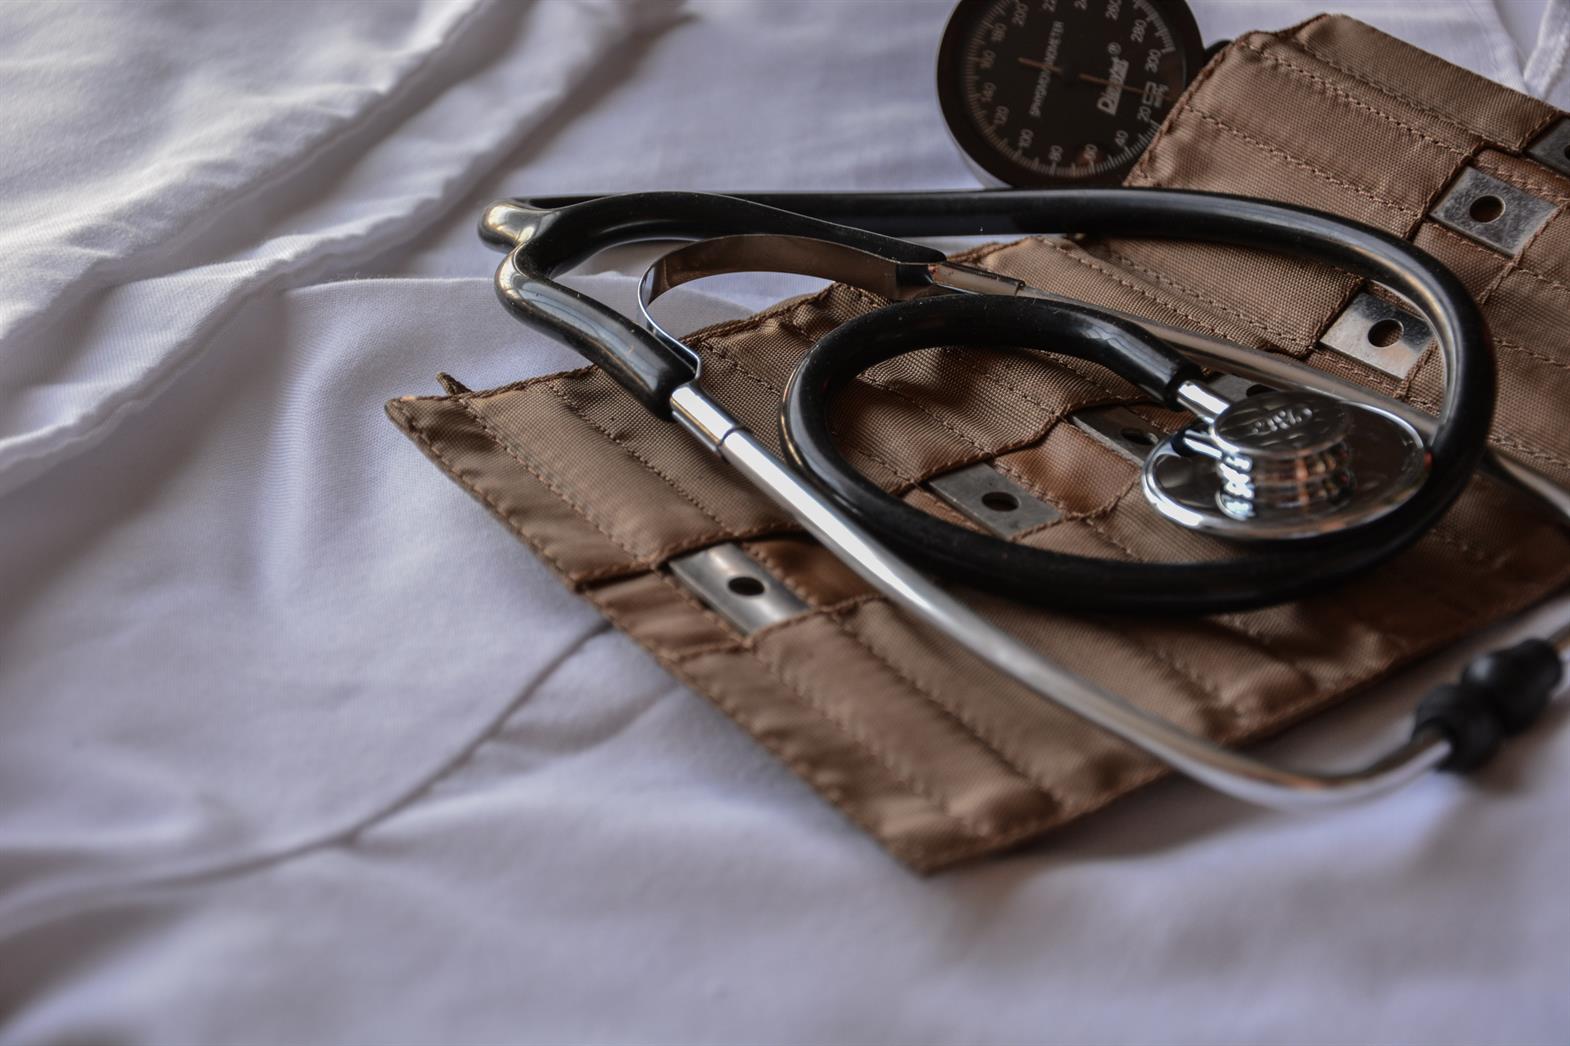 Stethoscope in carrying pouch